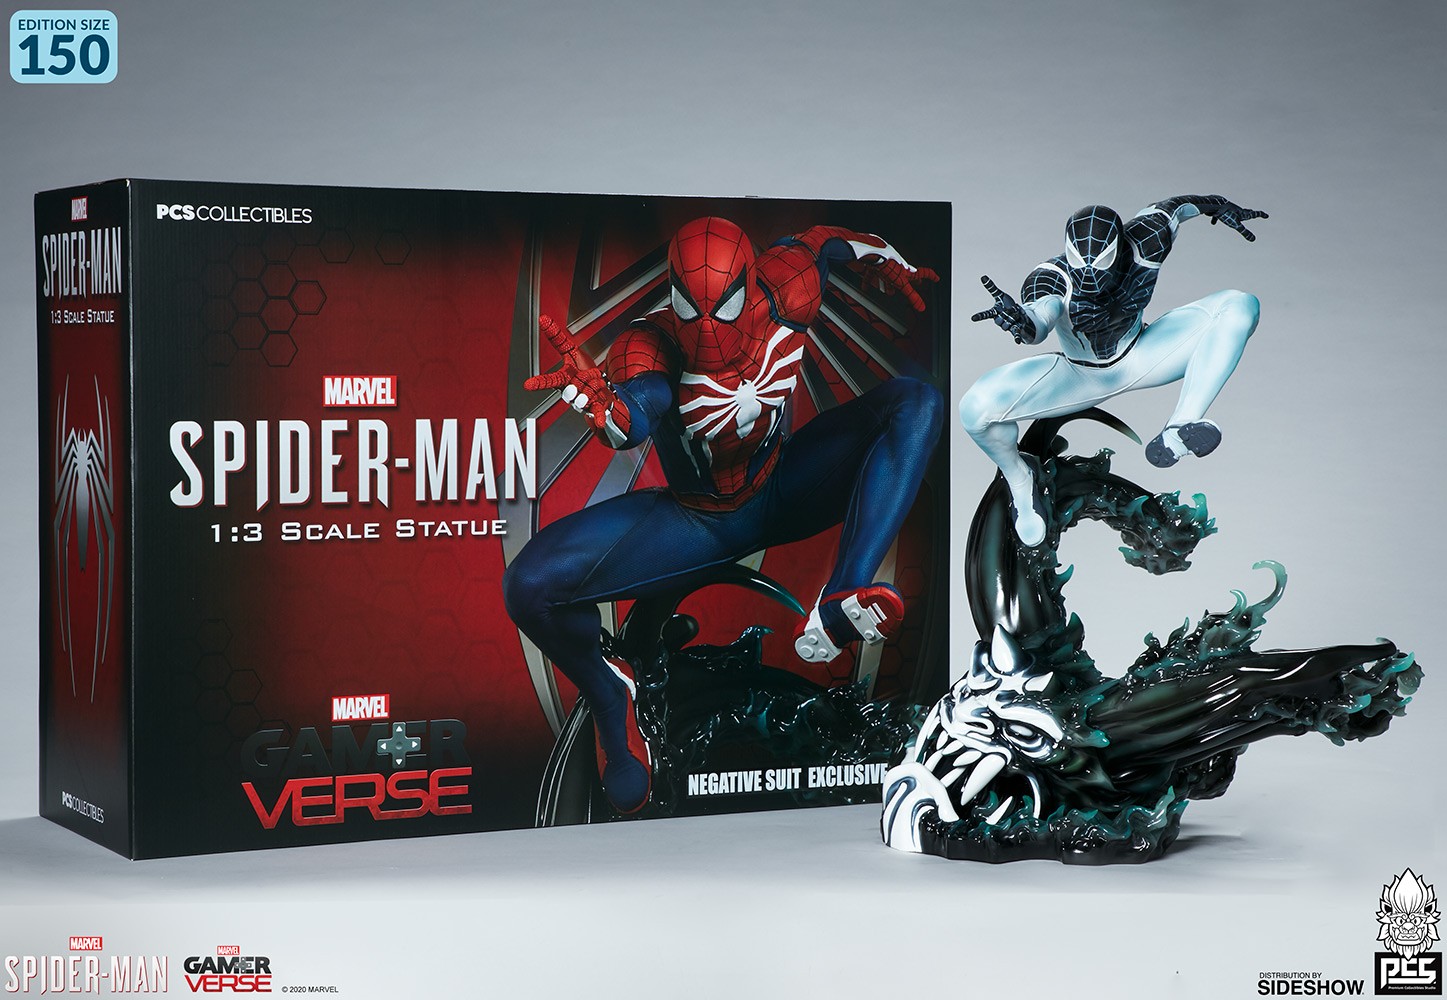 Spider-Man Negative Zone Suit Exclusive Edition (Prototype Shown) View 13